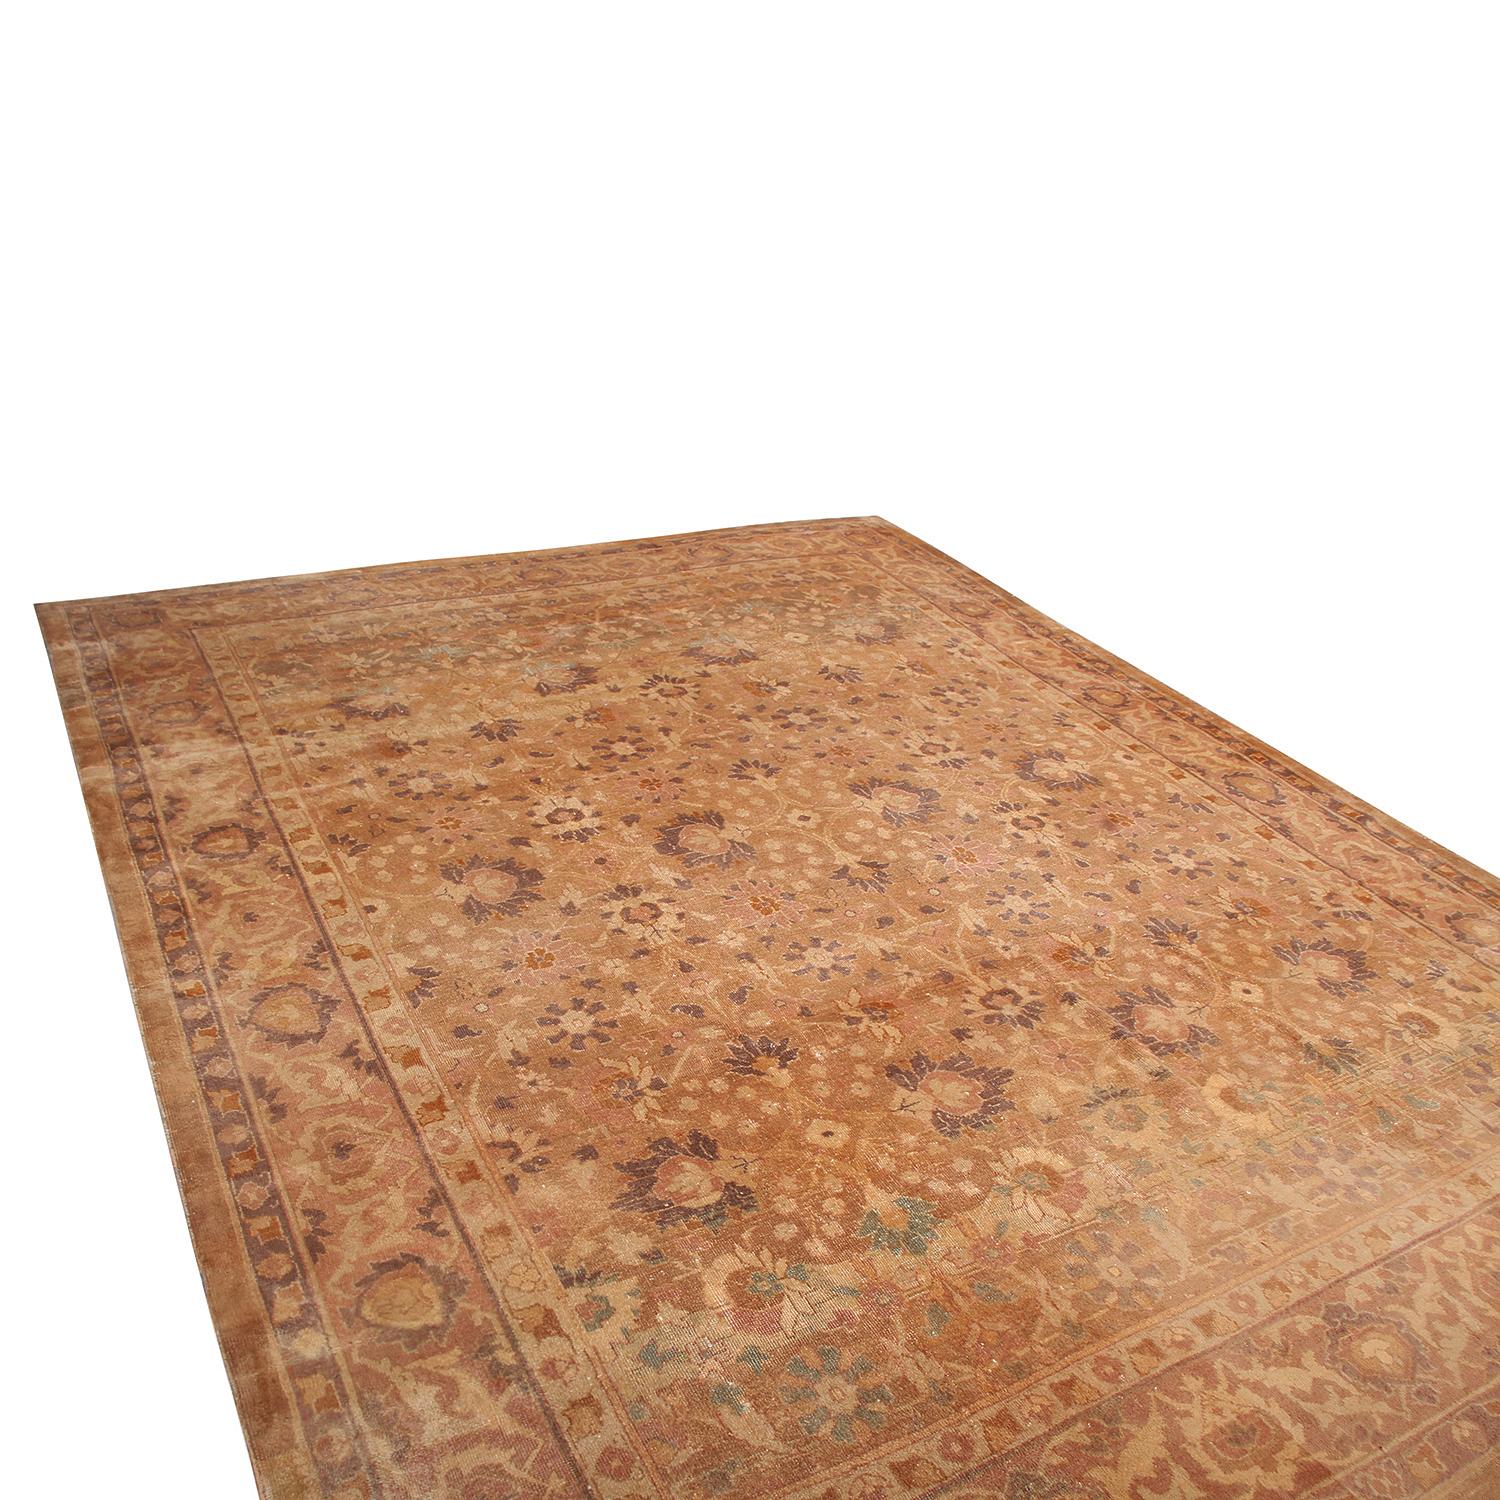 Hand knotted in Turkey originating between 1890-1900, this antique Oushak wool rug enjoys an inviting, meticulous symmetry in its floral pattern complementing variety of rich green, peach, and brown-black accents highlighting its finesse and